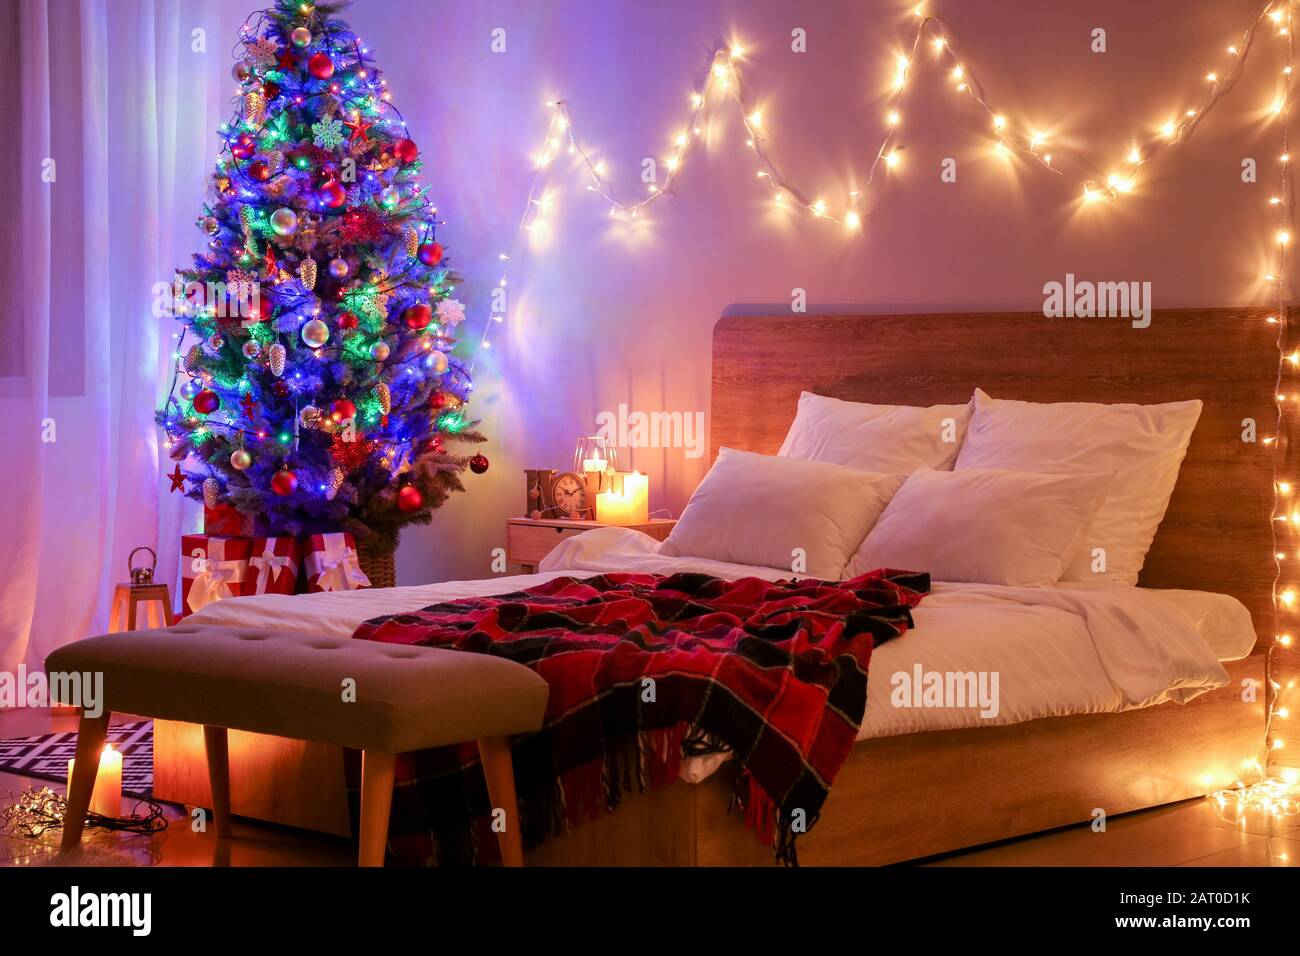 Interior of bedroom with beautiful decorated Christmas tree at ...